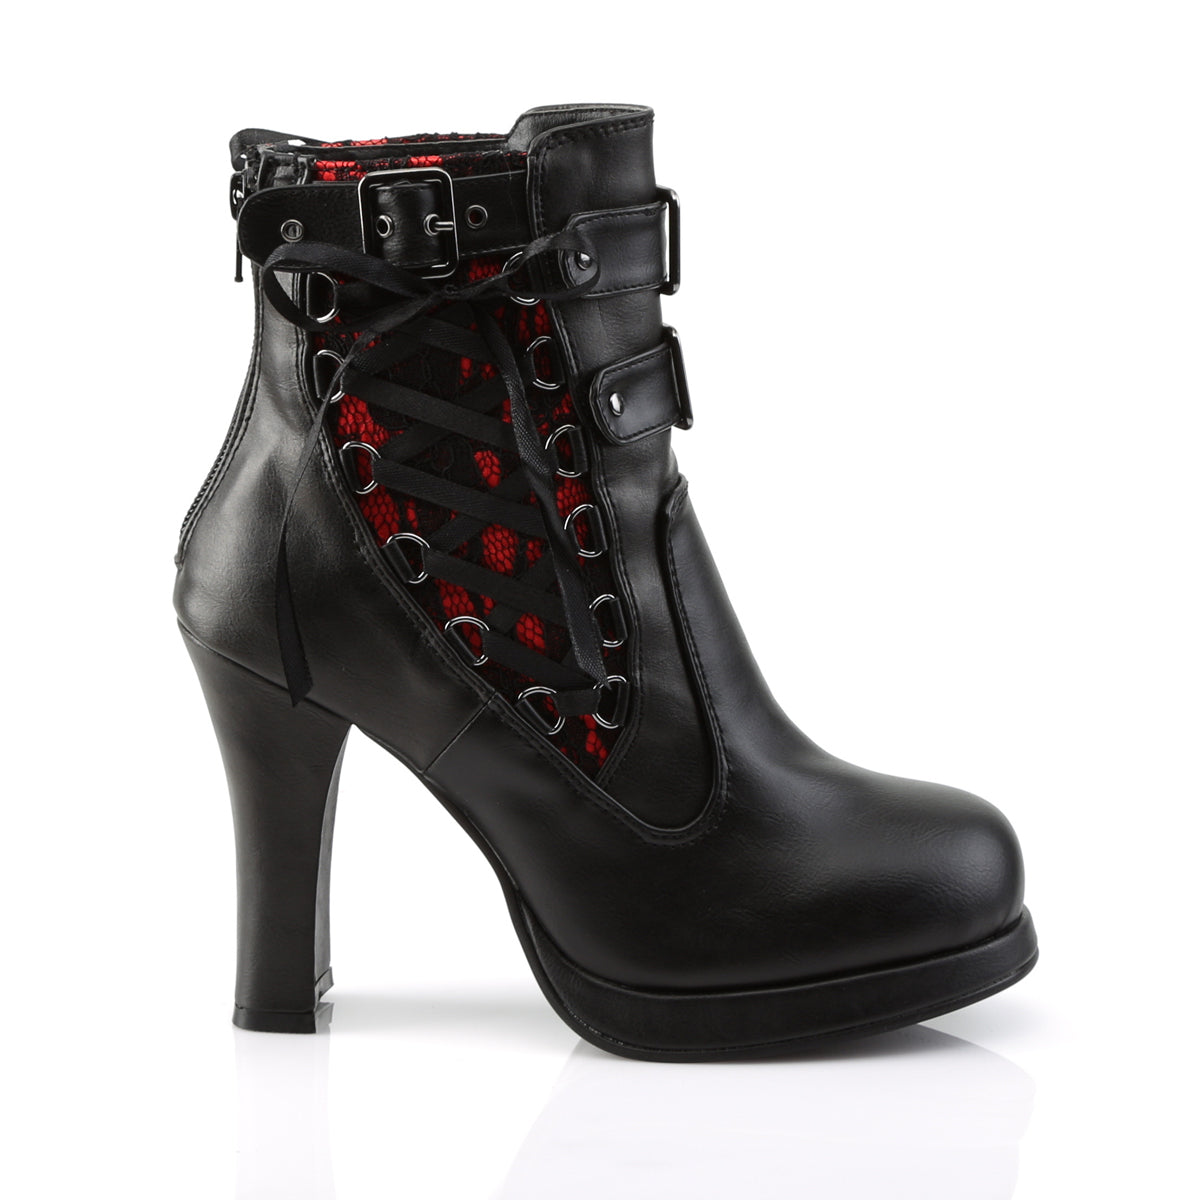 DemoniaCult Womens Ankle Boots CRYPTO-51 Blk-Red Lace Vegan Leather